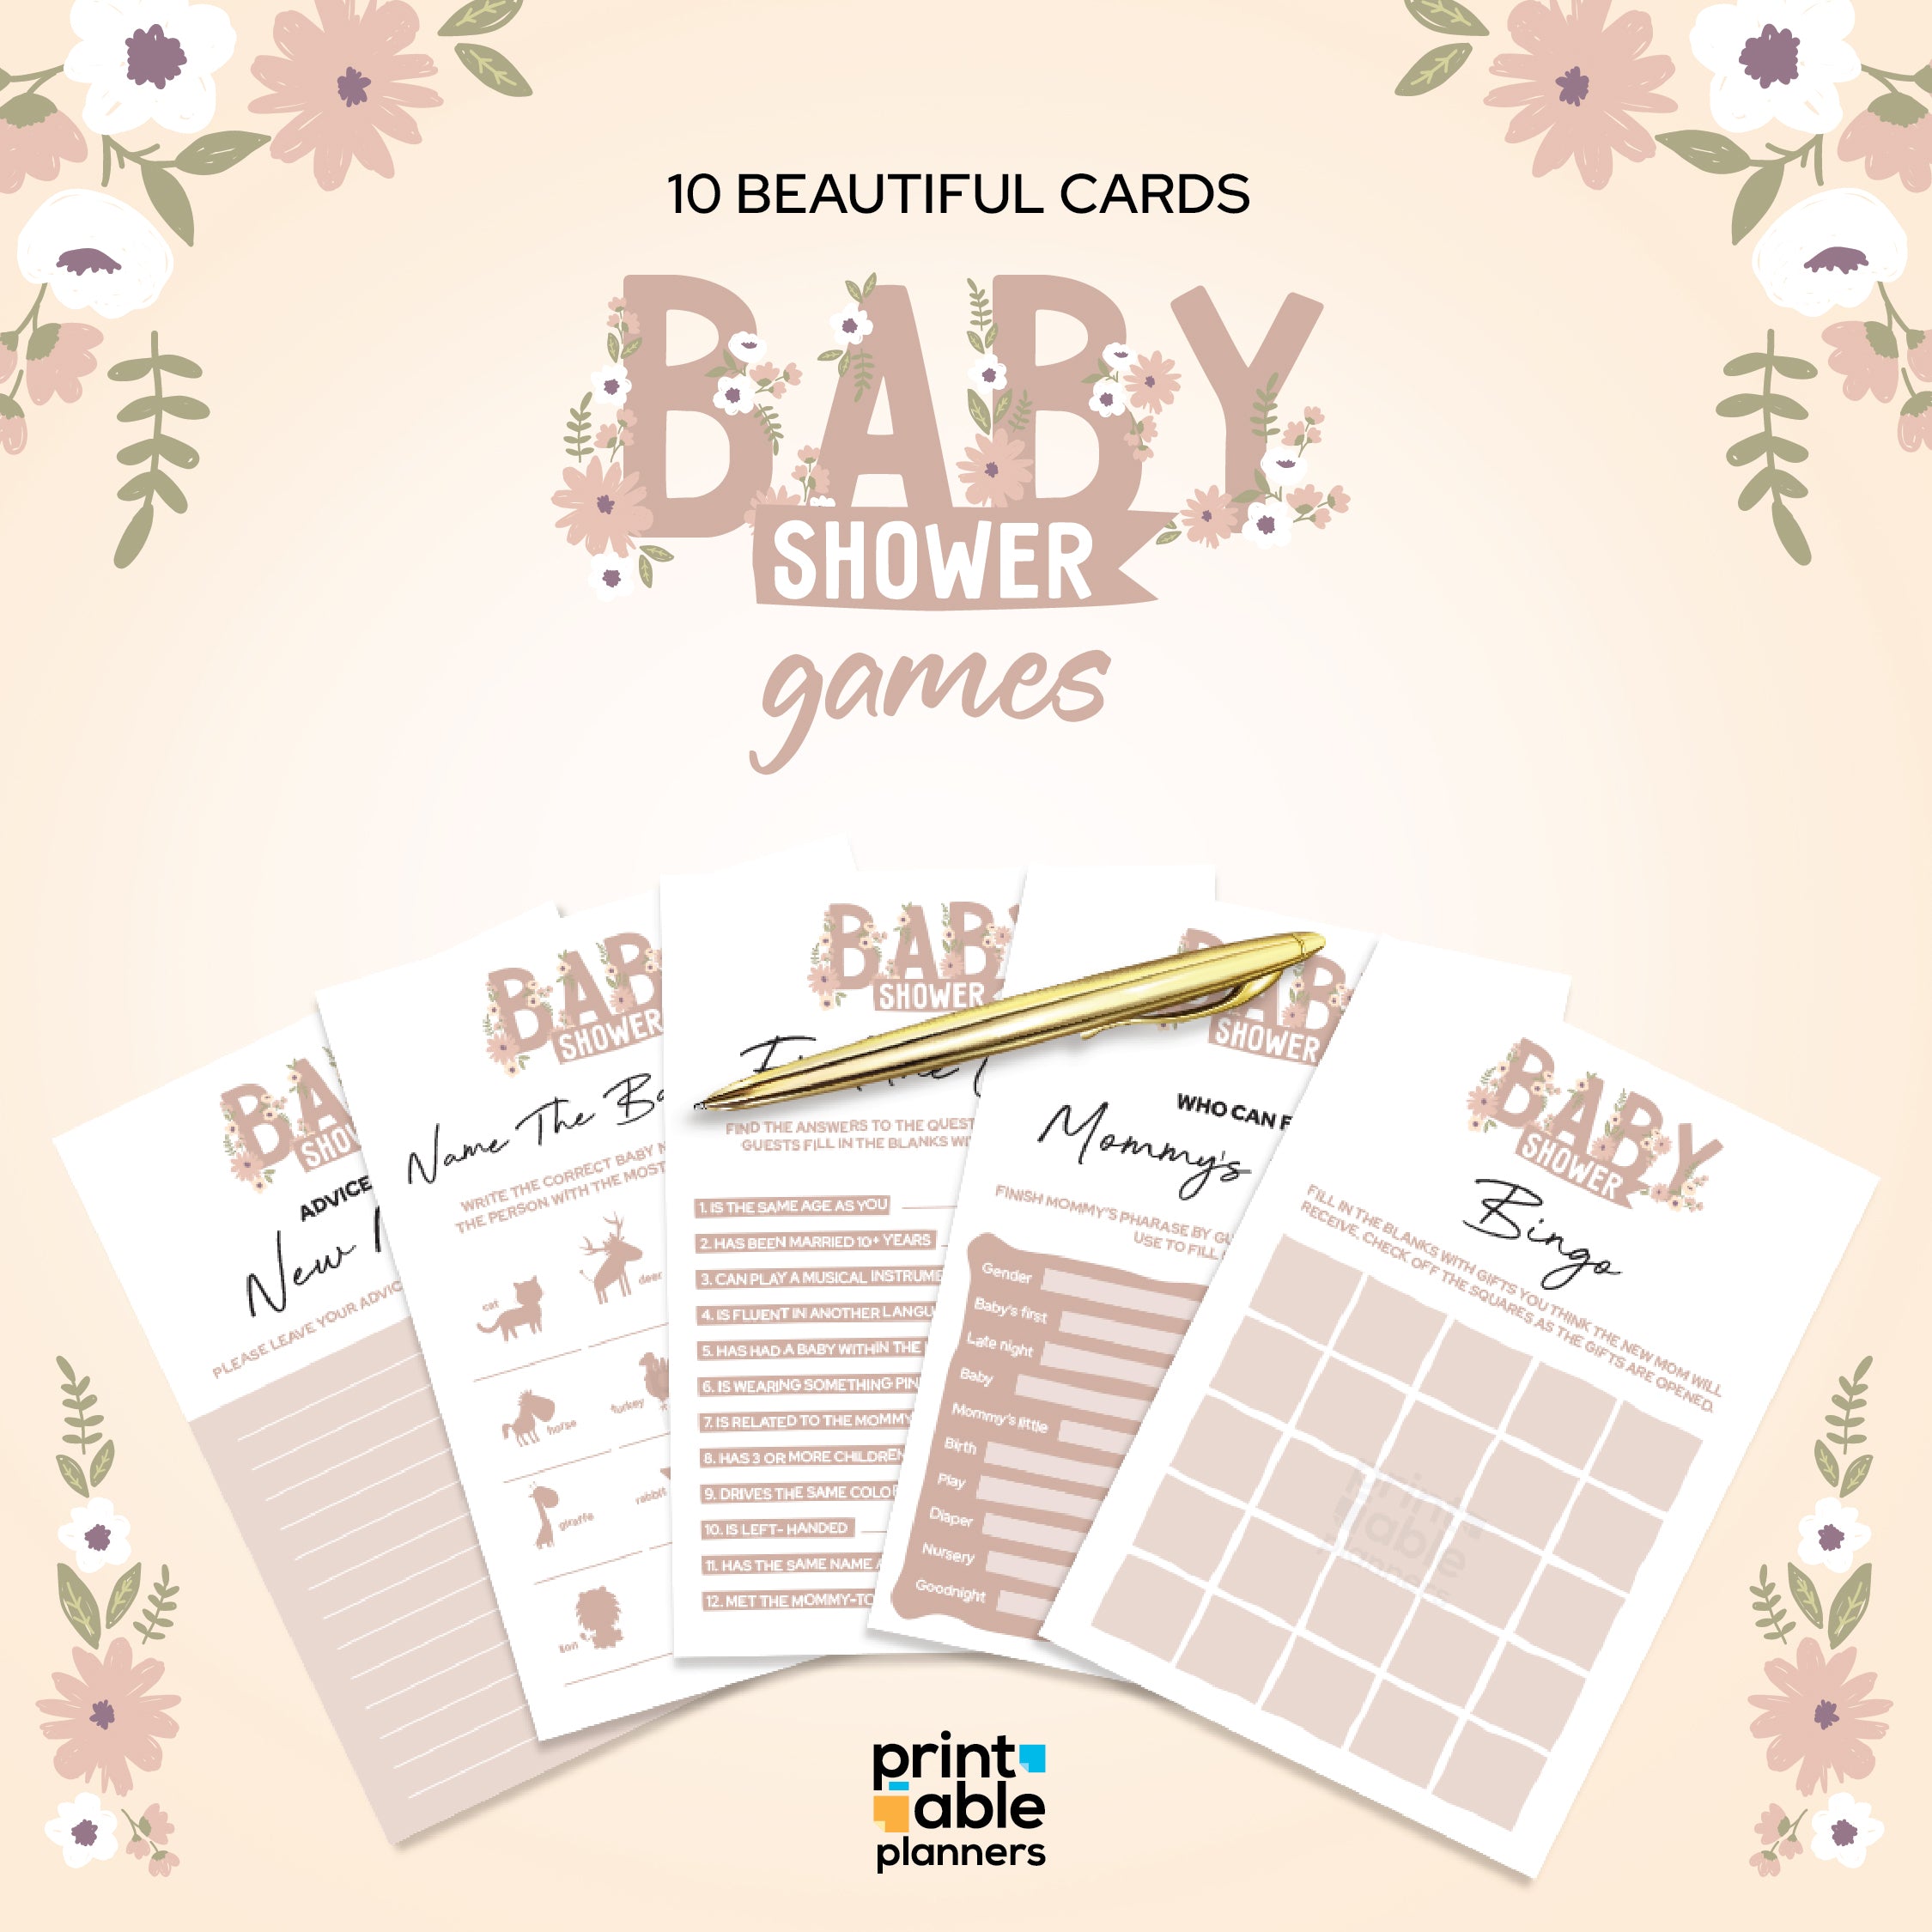 Instant Download | Gender Neutral | Virtual Baby Shower | Baby Shower Trivia | Baby Shower Feud Baby Family Feud Baby Shower Game